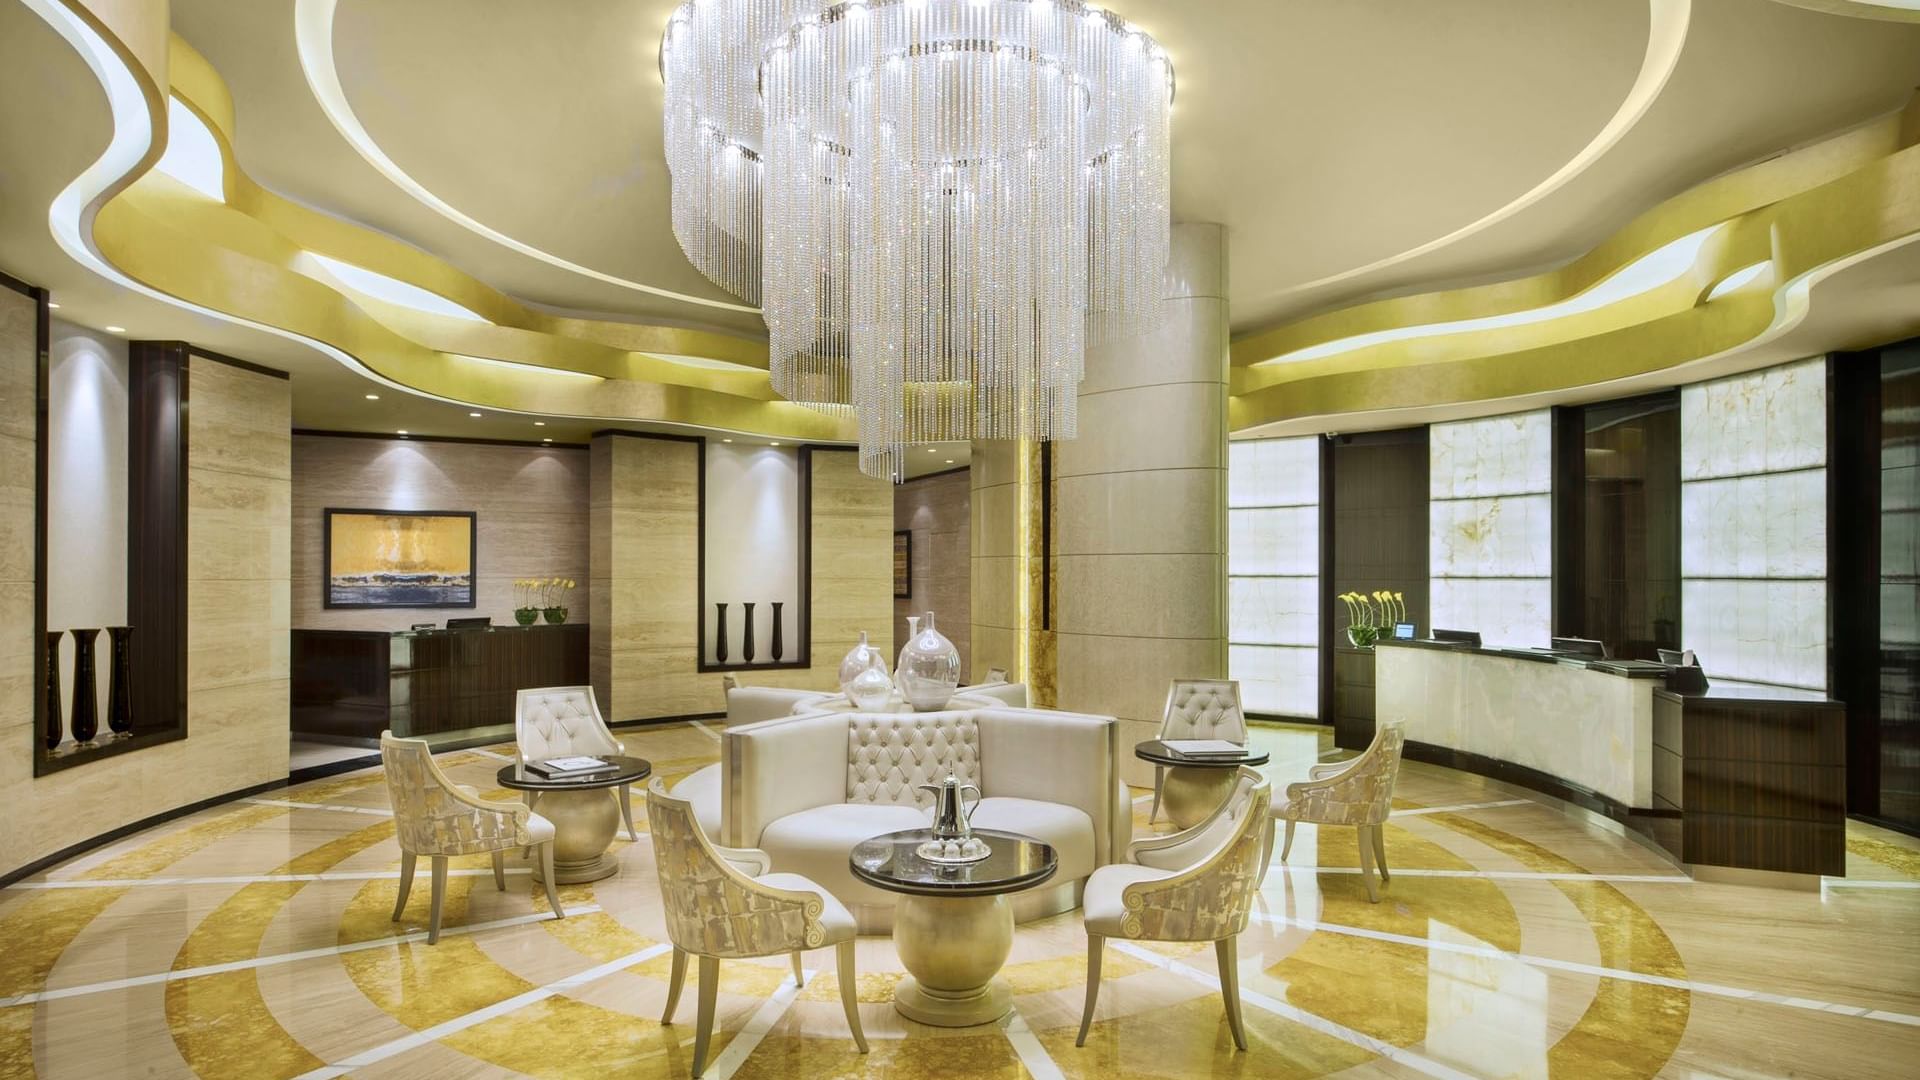 Lobby area with modern decor & warm abience featuring front desk at DAMAC Maison Cour Jardin